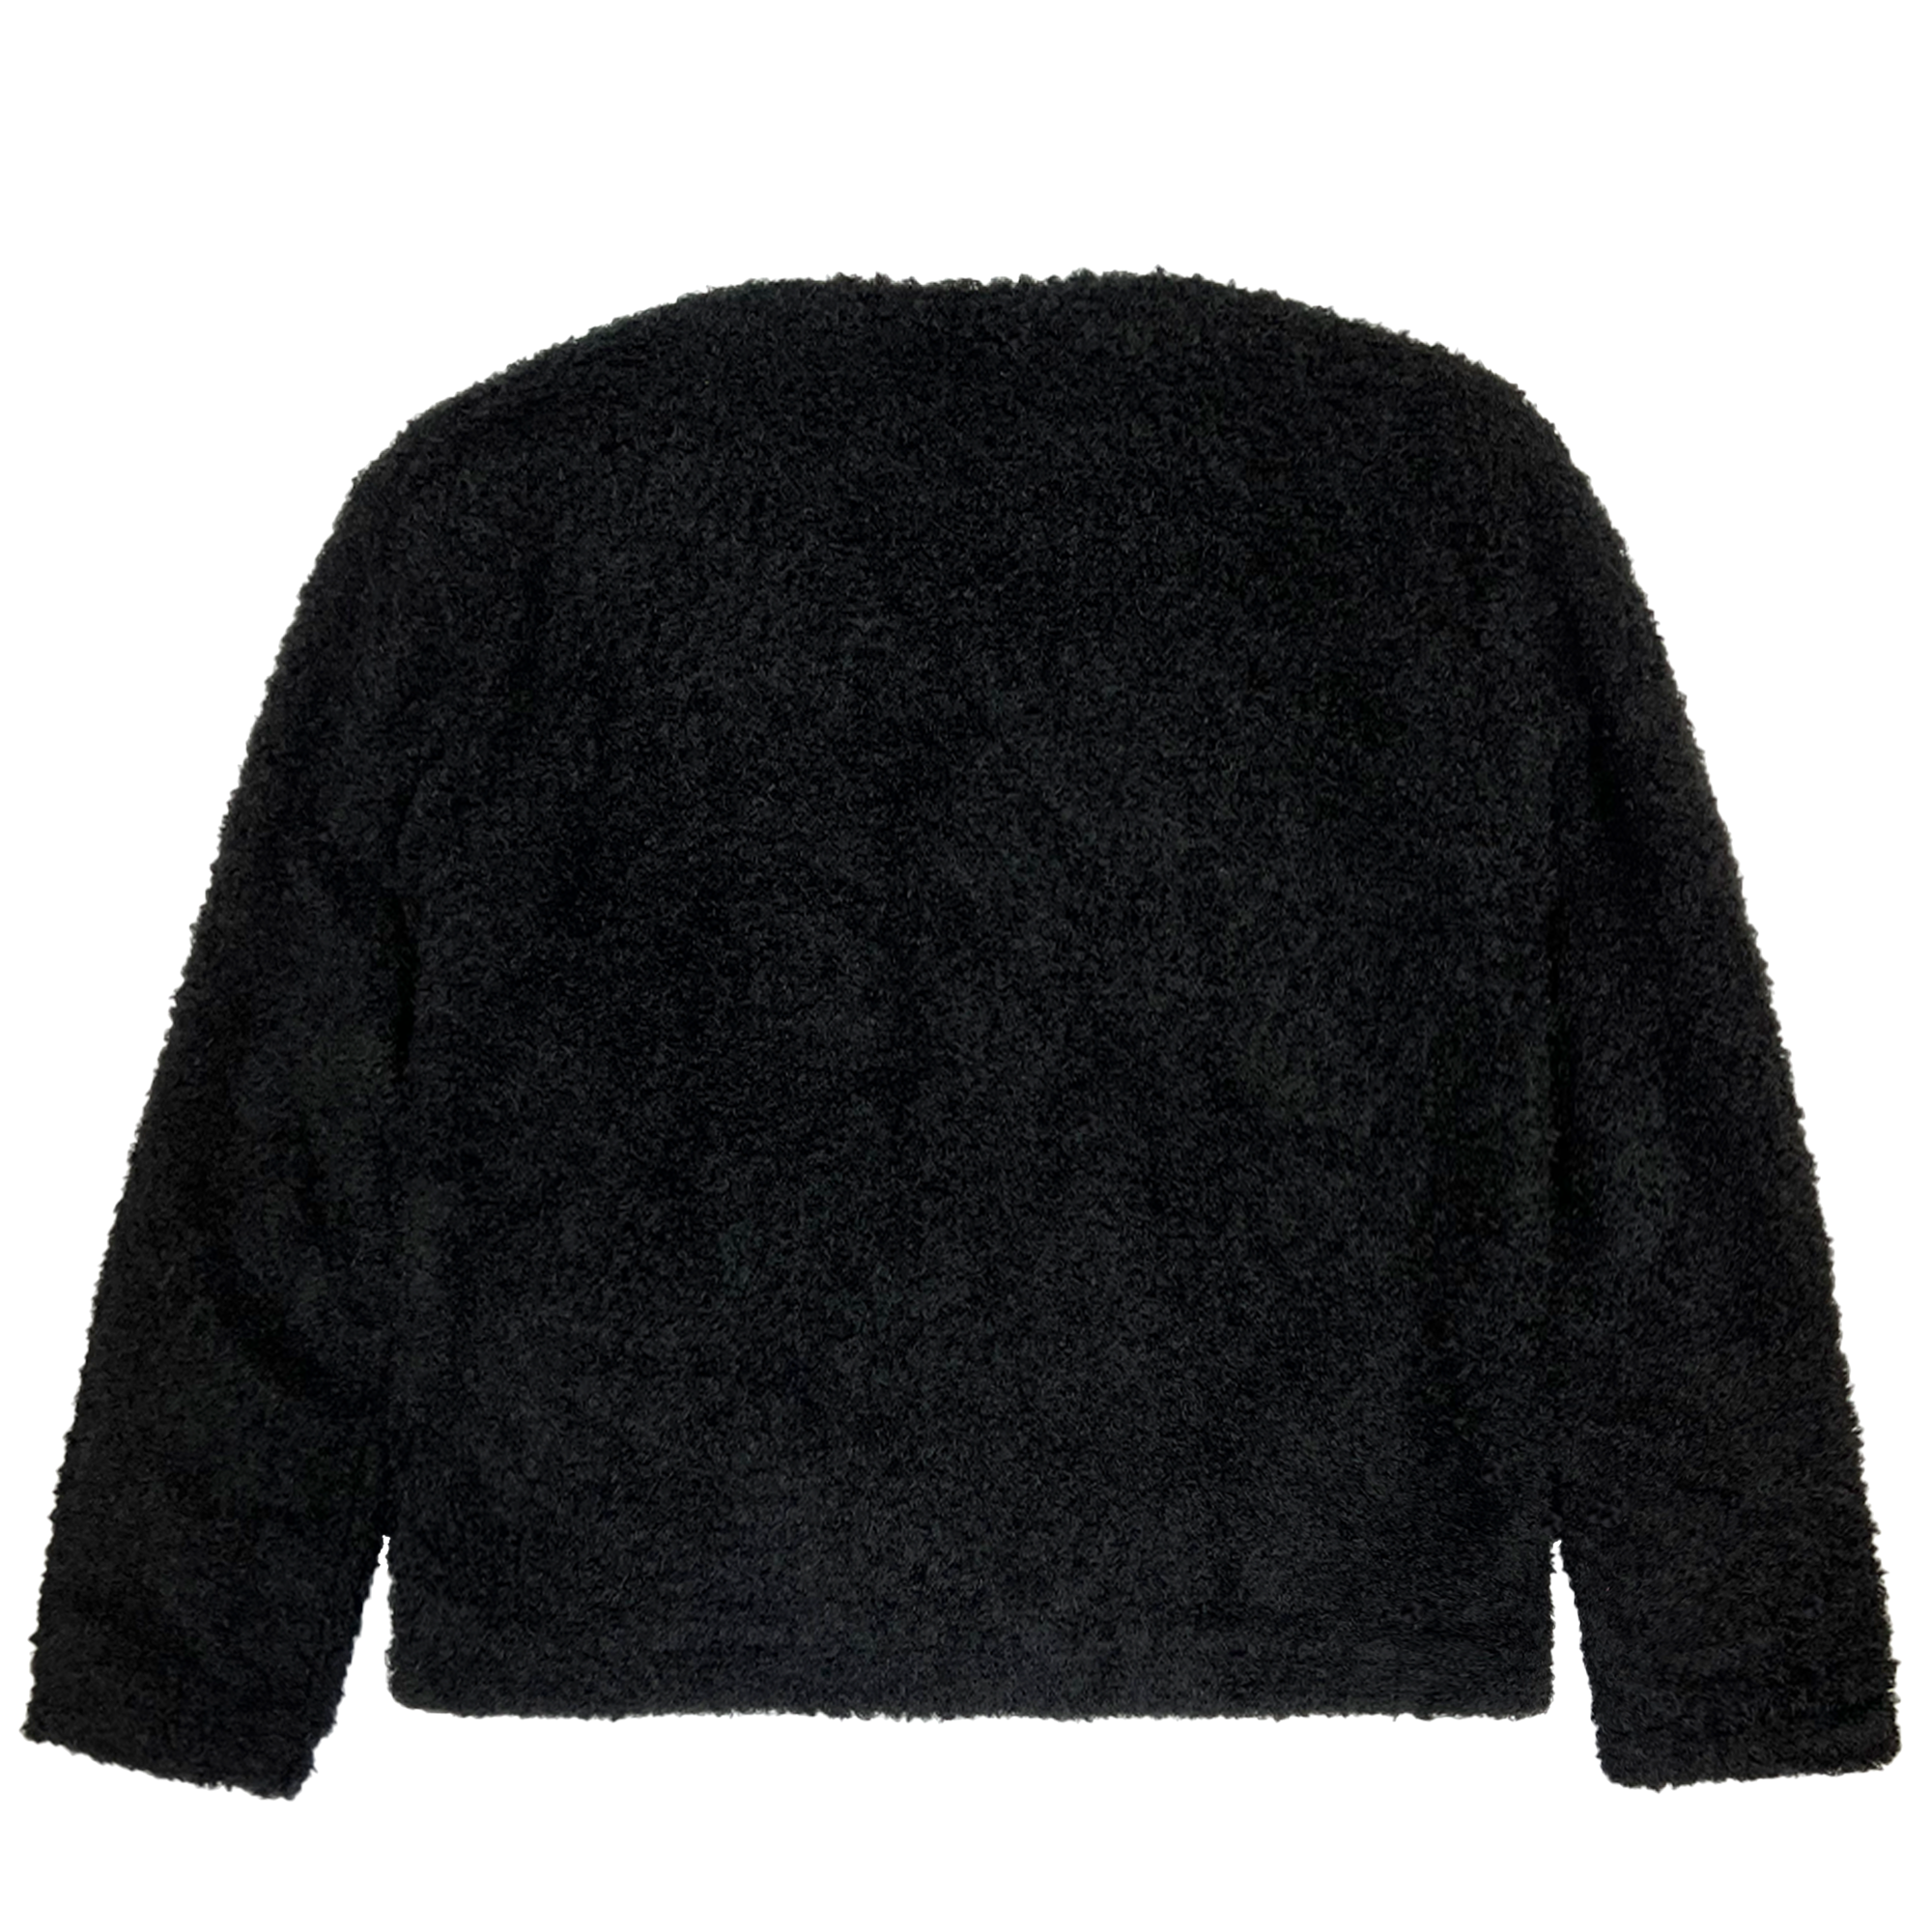 The Salvages 'Sublime' Teddy Cardigan in Black